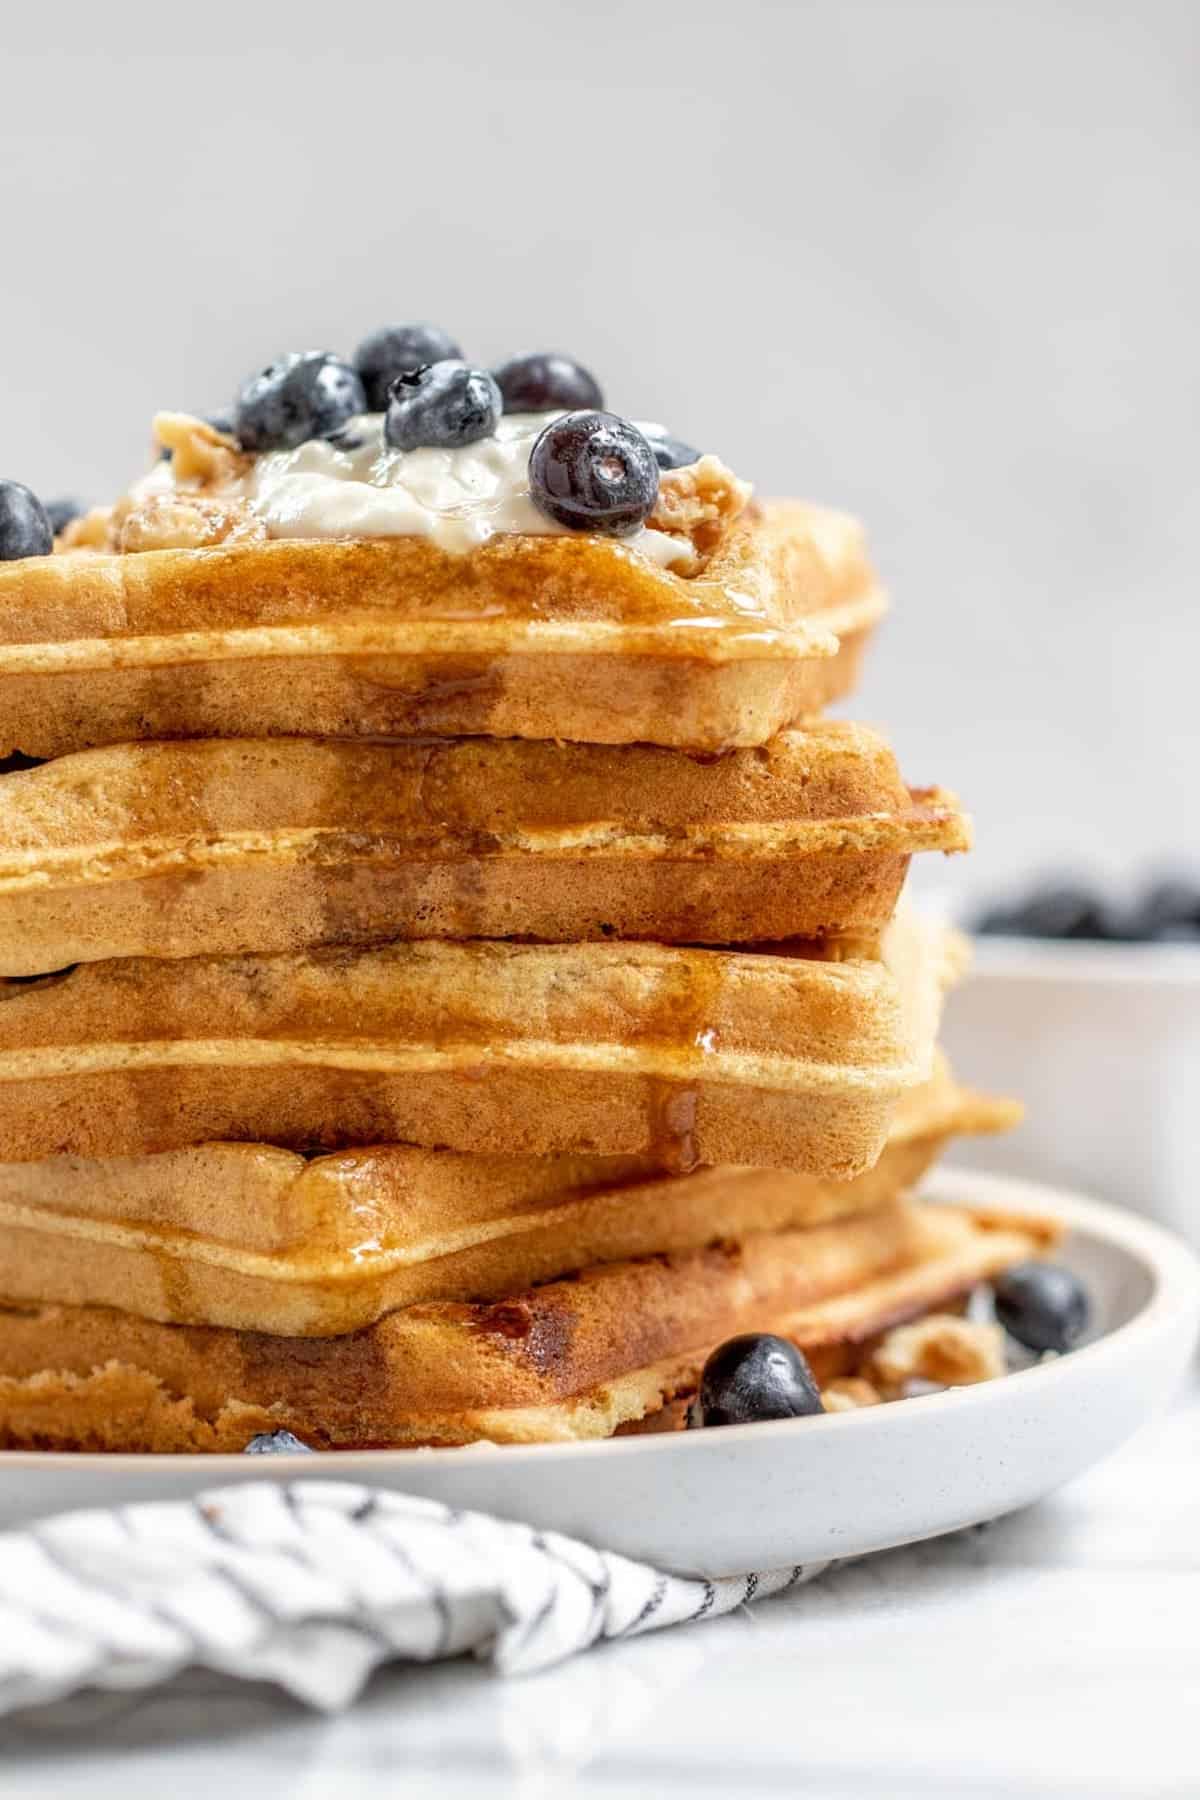 Tall stack of vegan almond flour waffles with berries on top.